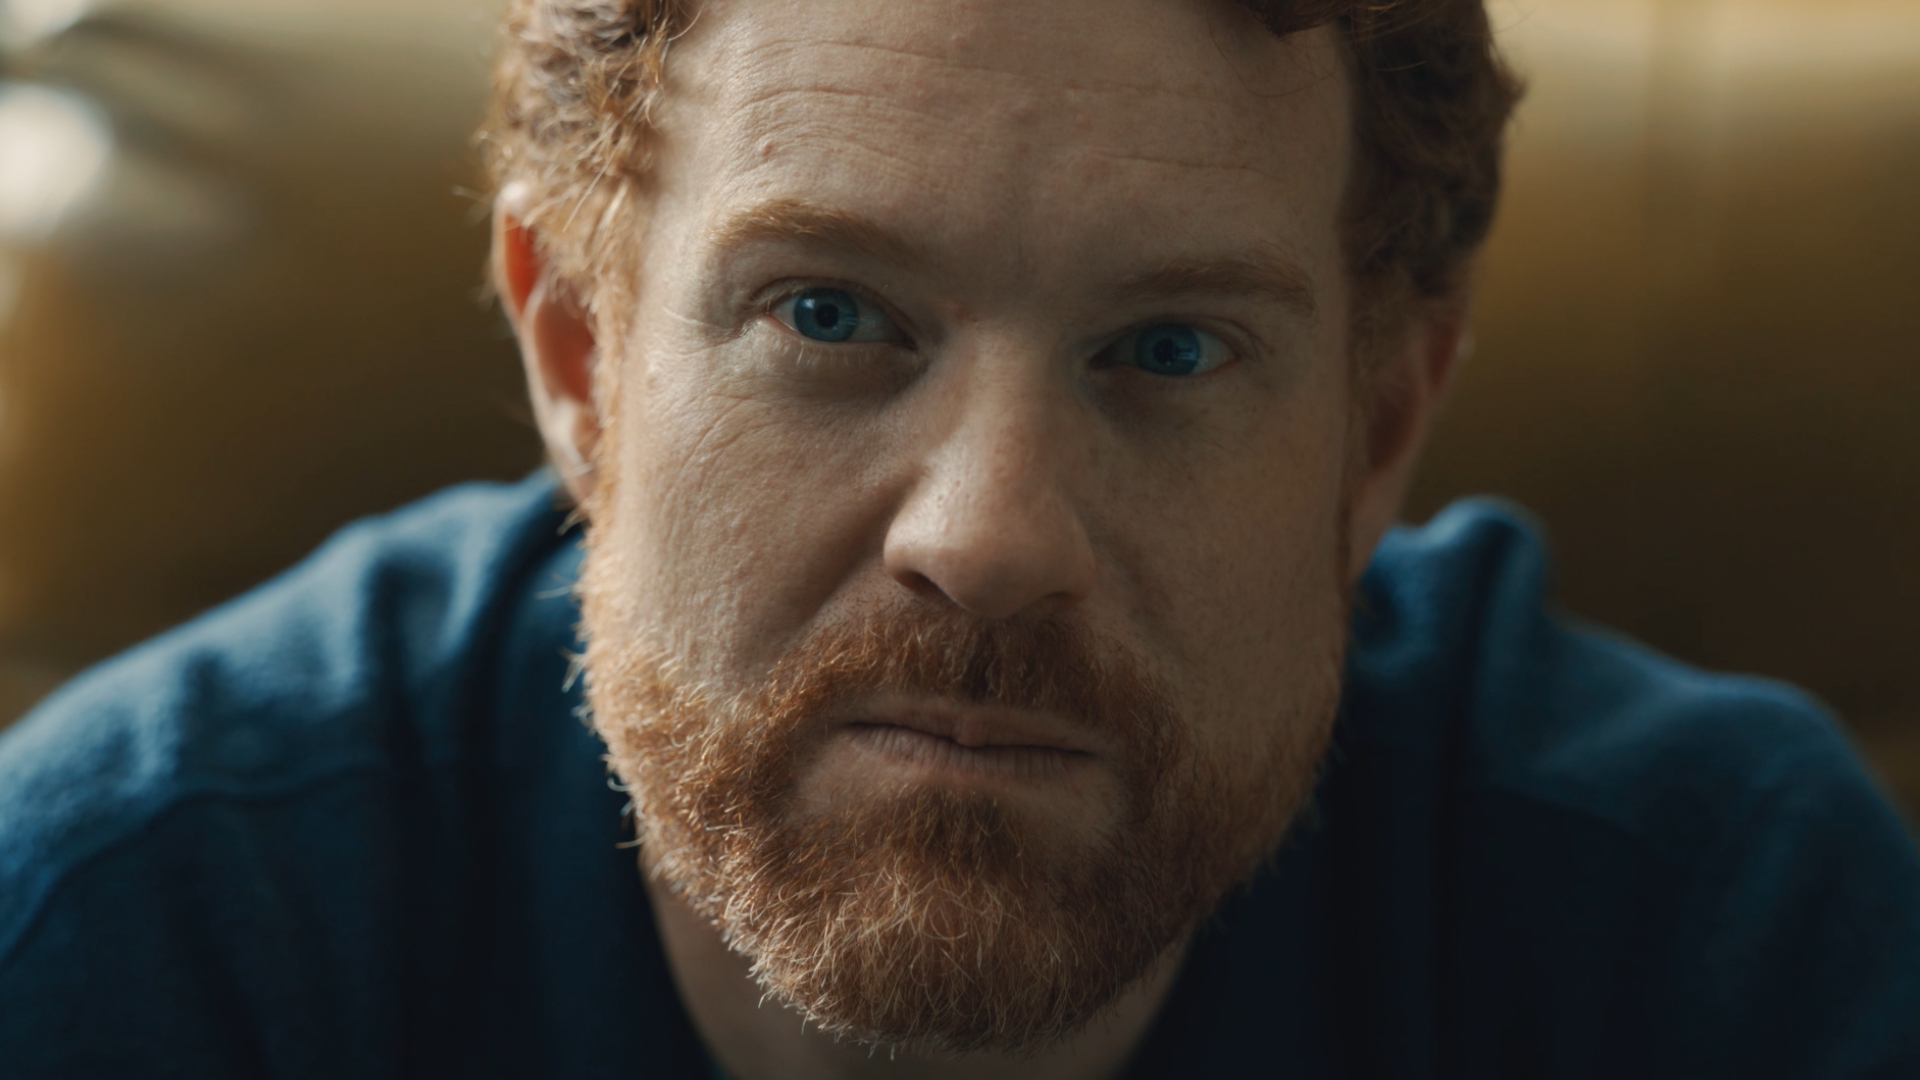 A close-up of a man with short, curly reddish hair and a full beard. He has blue eyes and is wearing a dark shirt. He is looking directly at the camera with a serious expression.